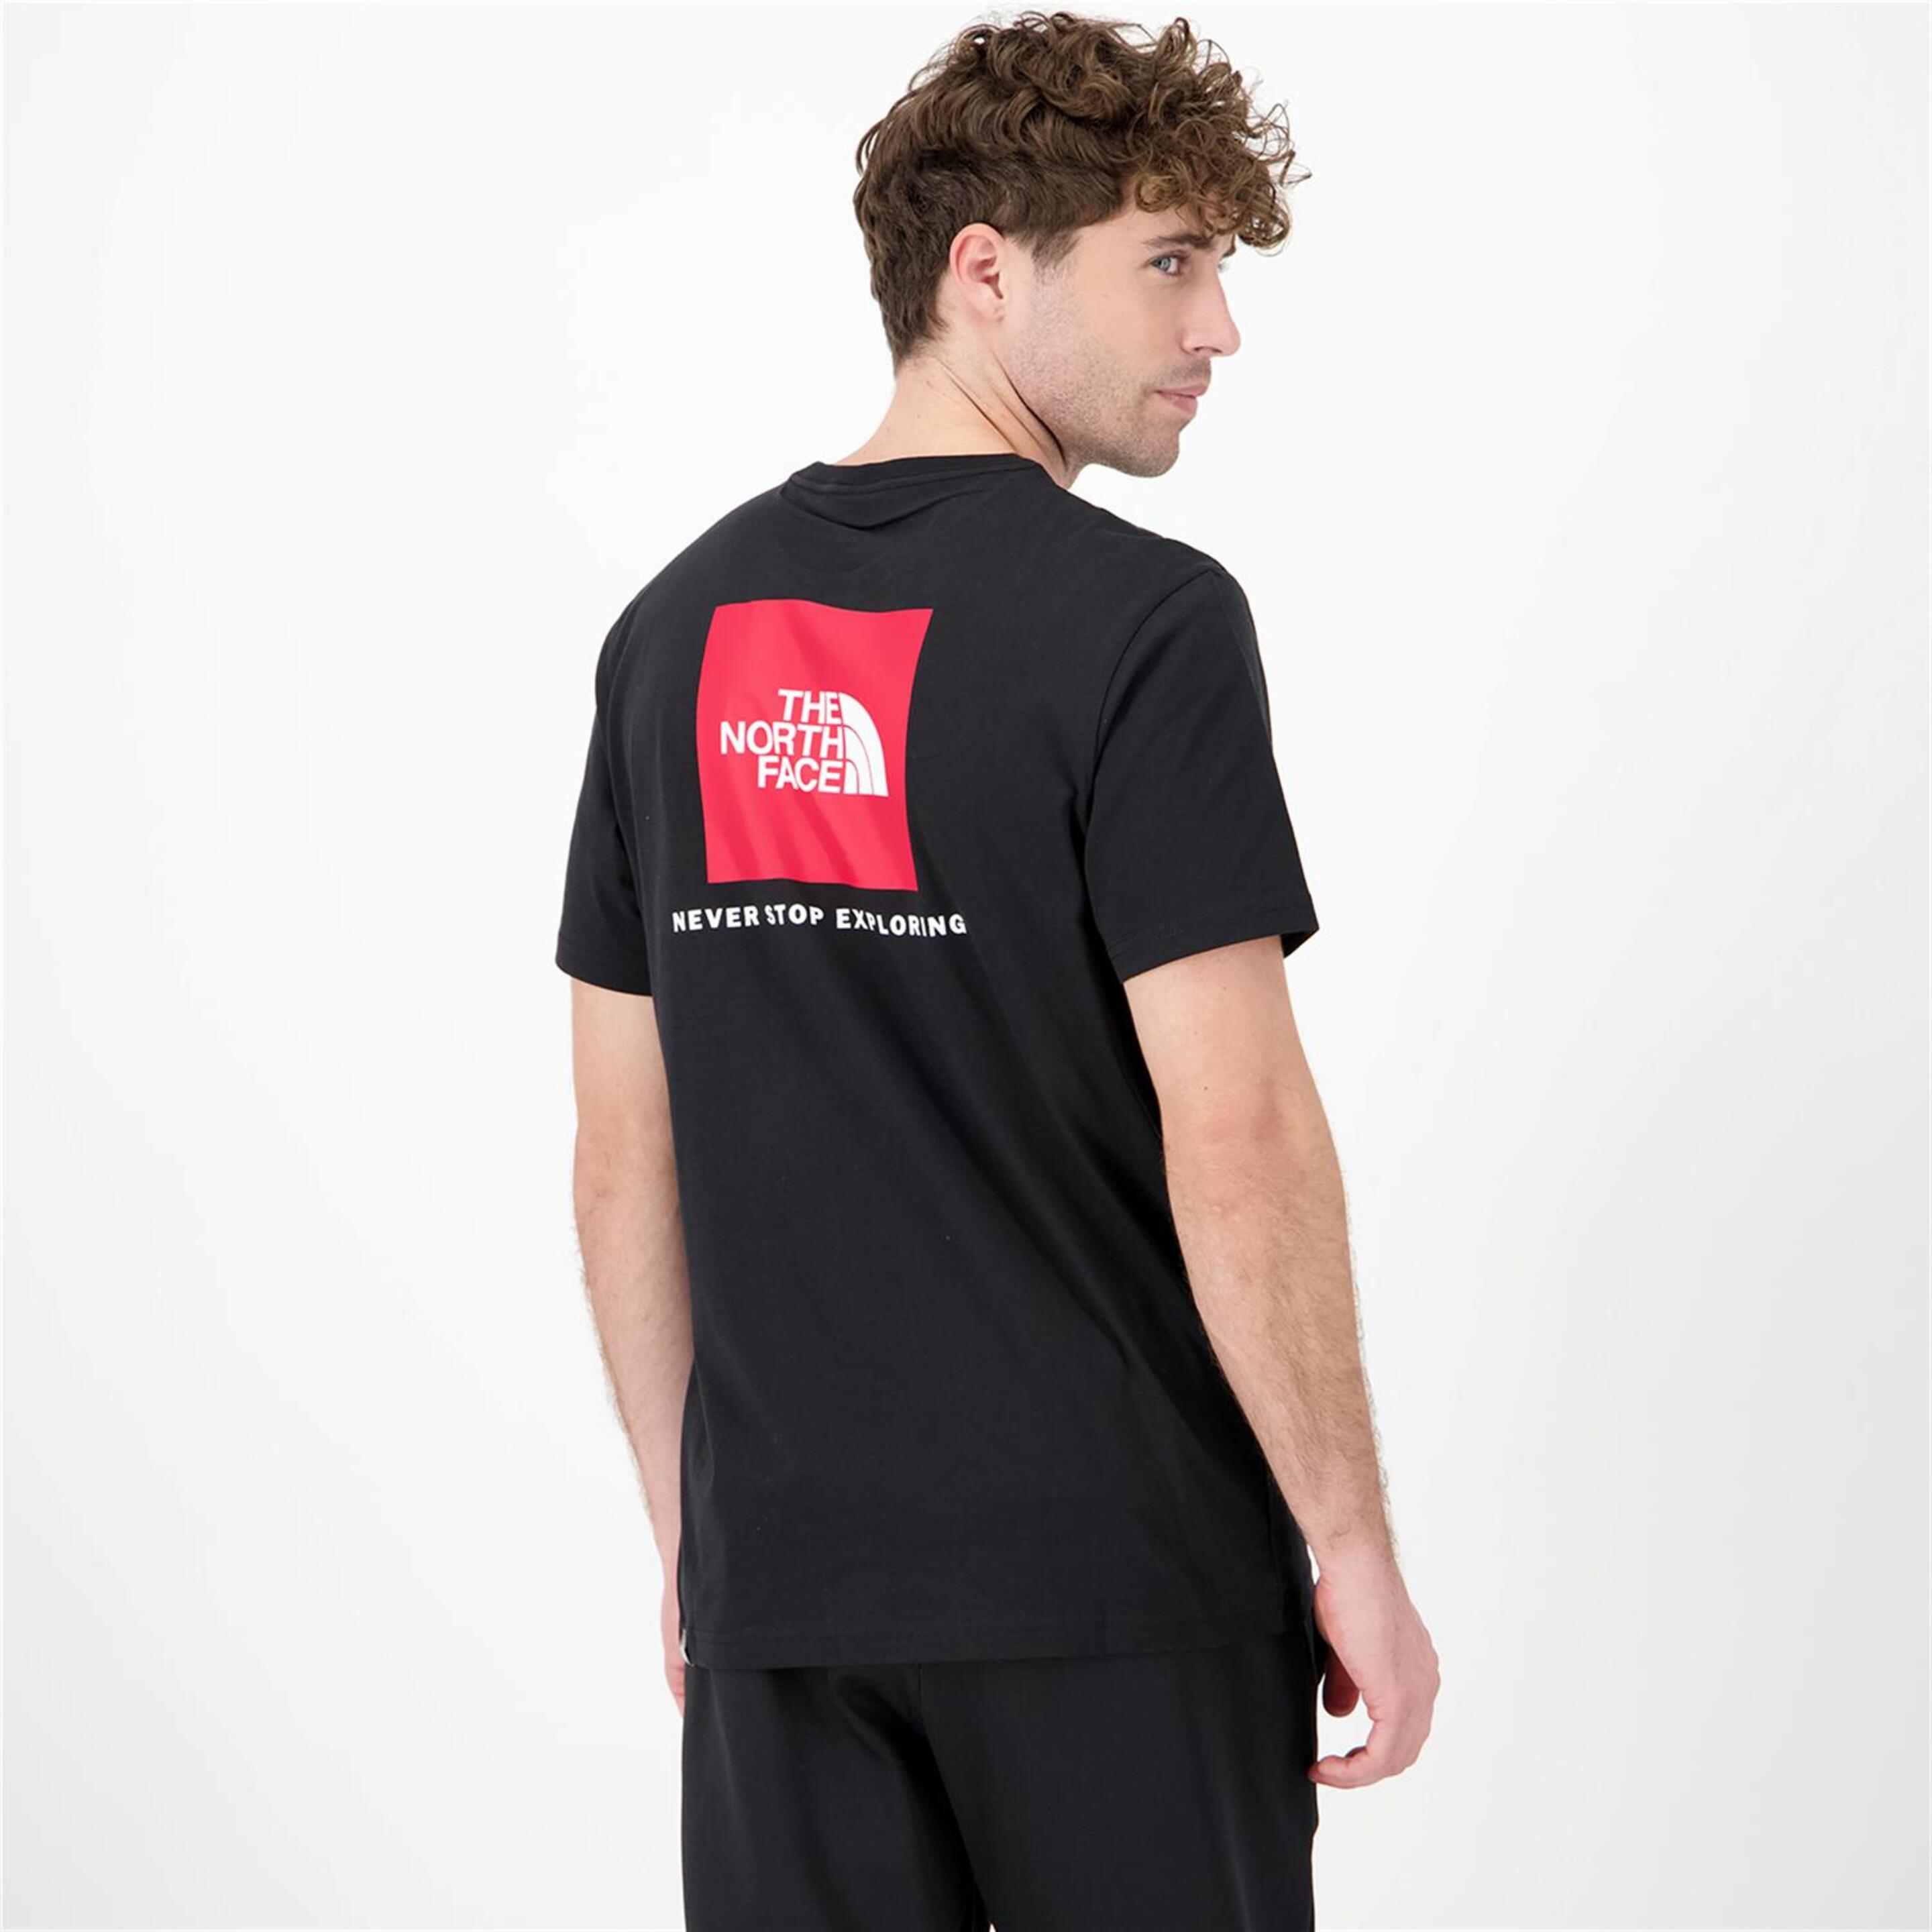 The North Face Red Box - Negro - Camiseta Hombre